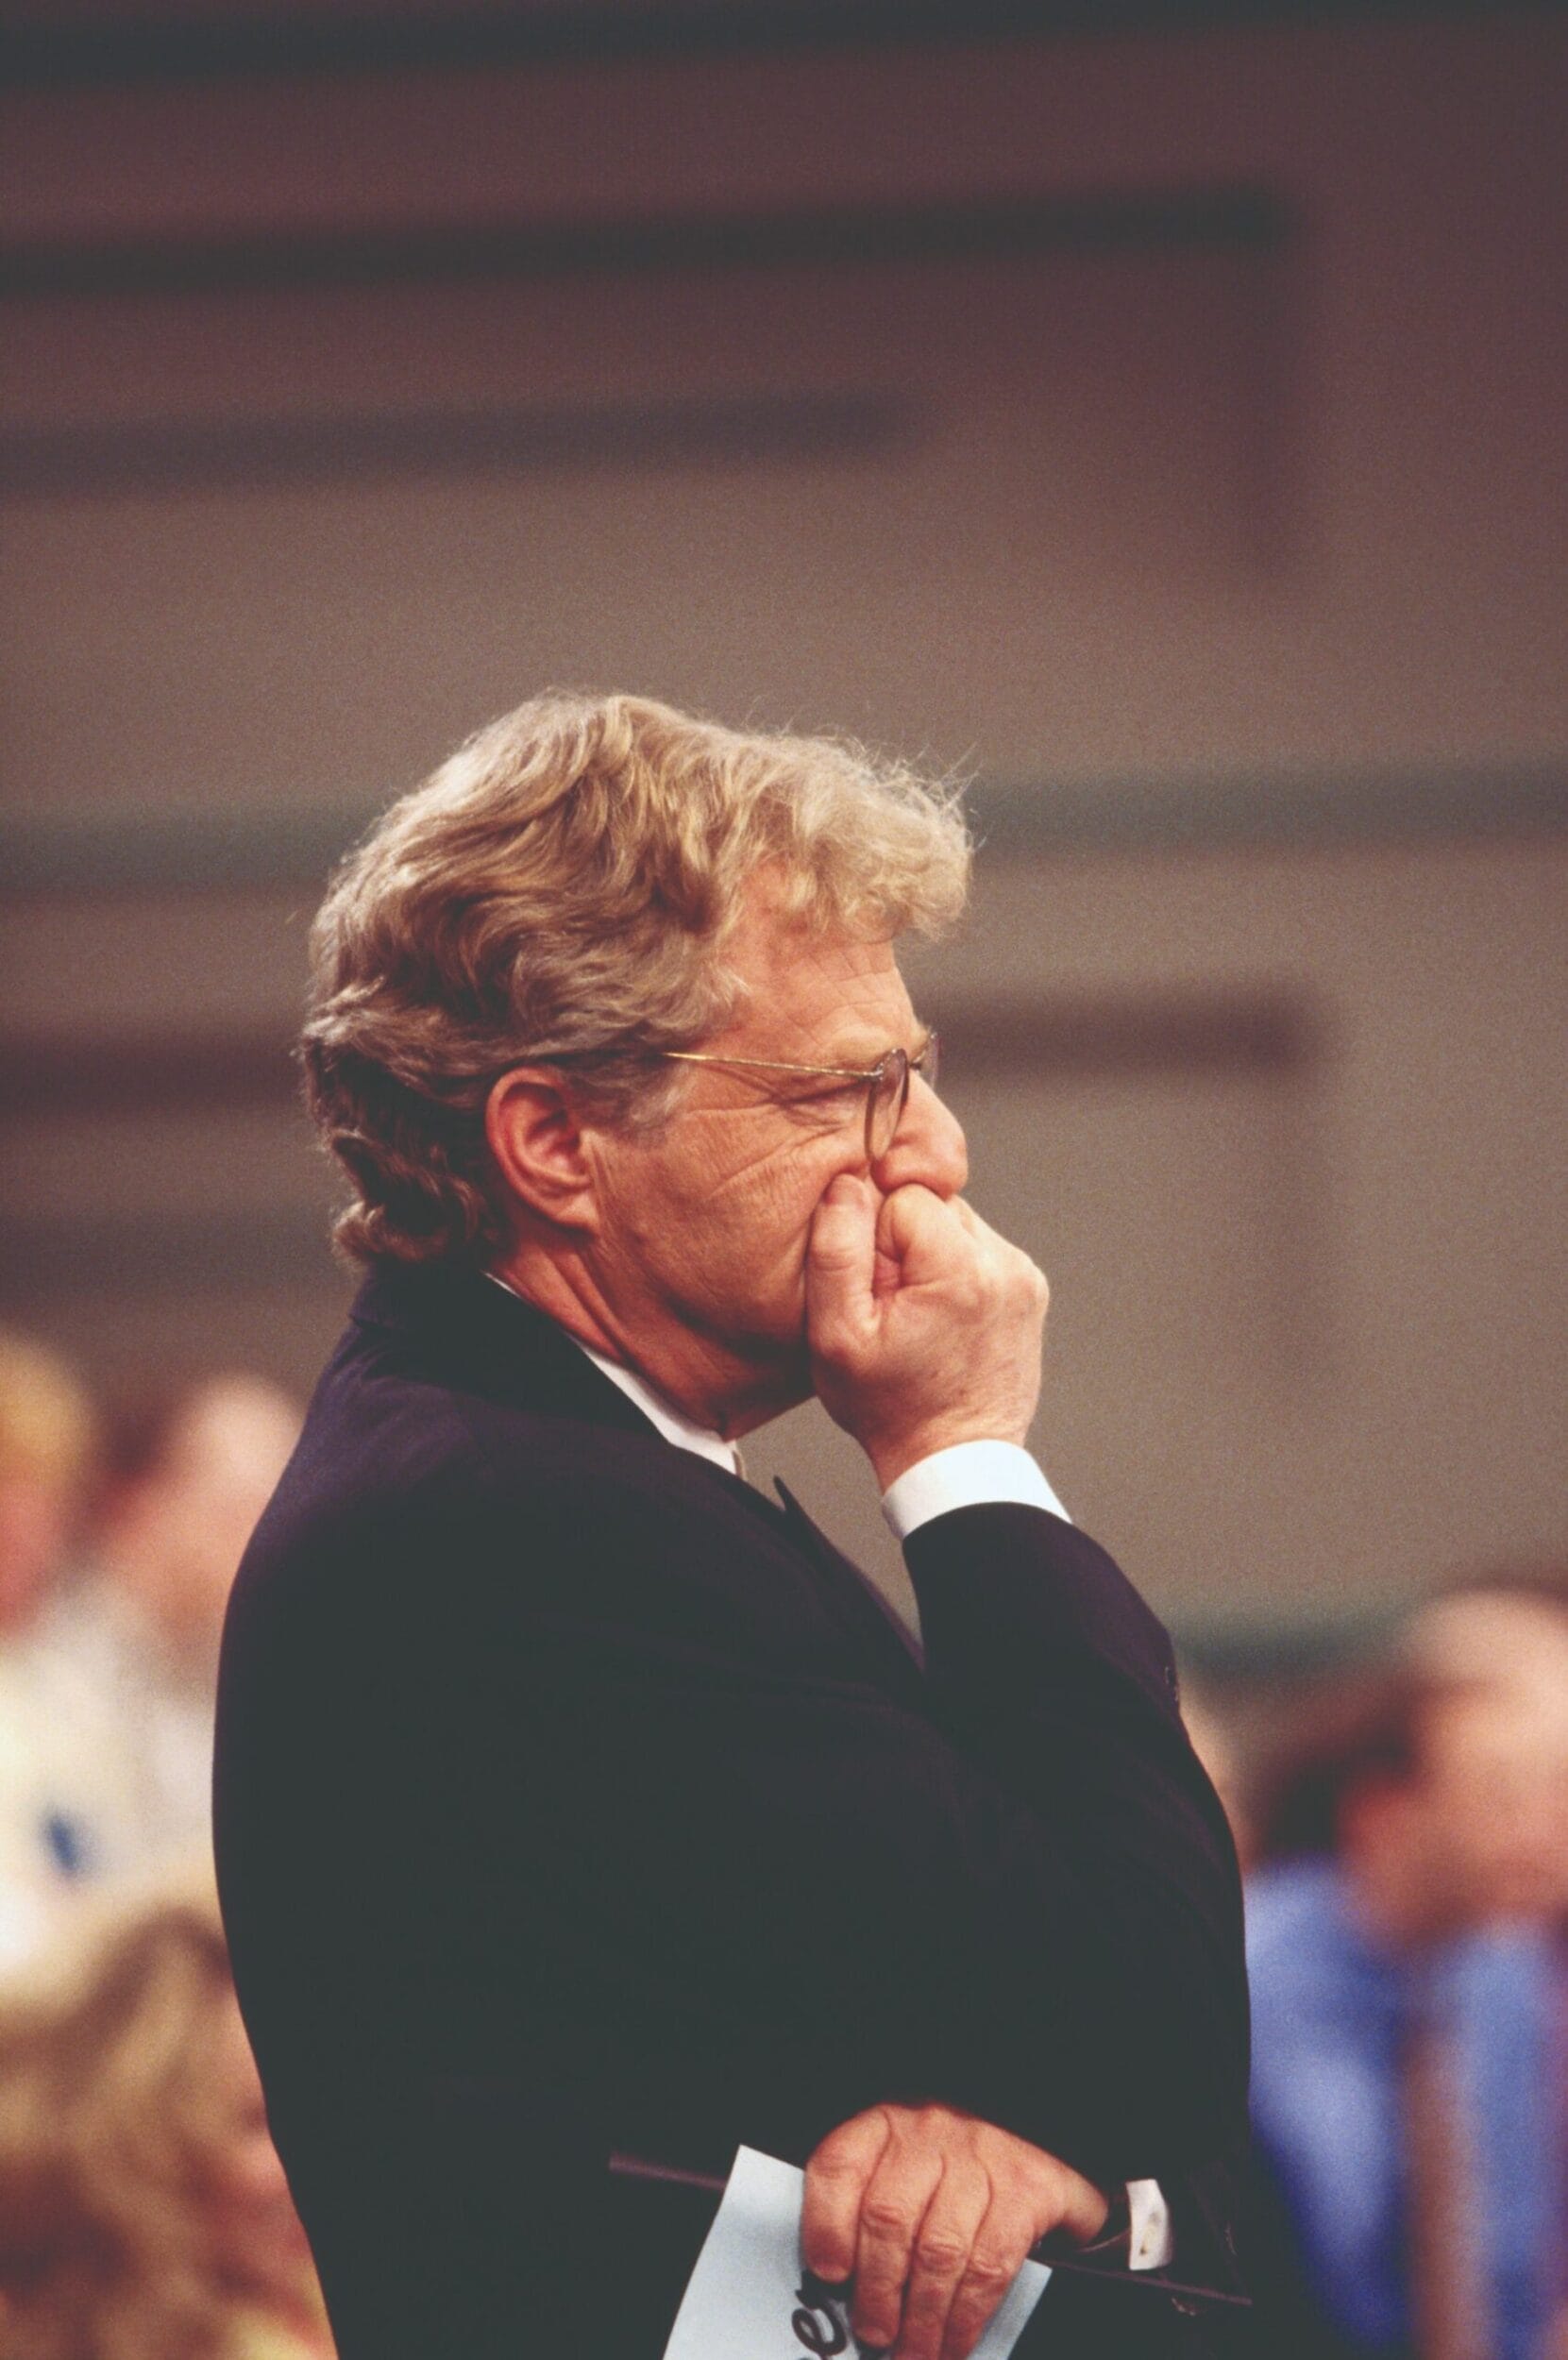 Jerry Springer pauses to listen to his guests during the taping of an episode of The Jerry Springer Show